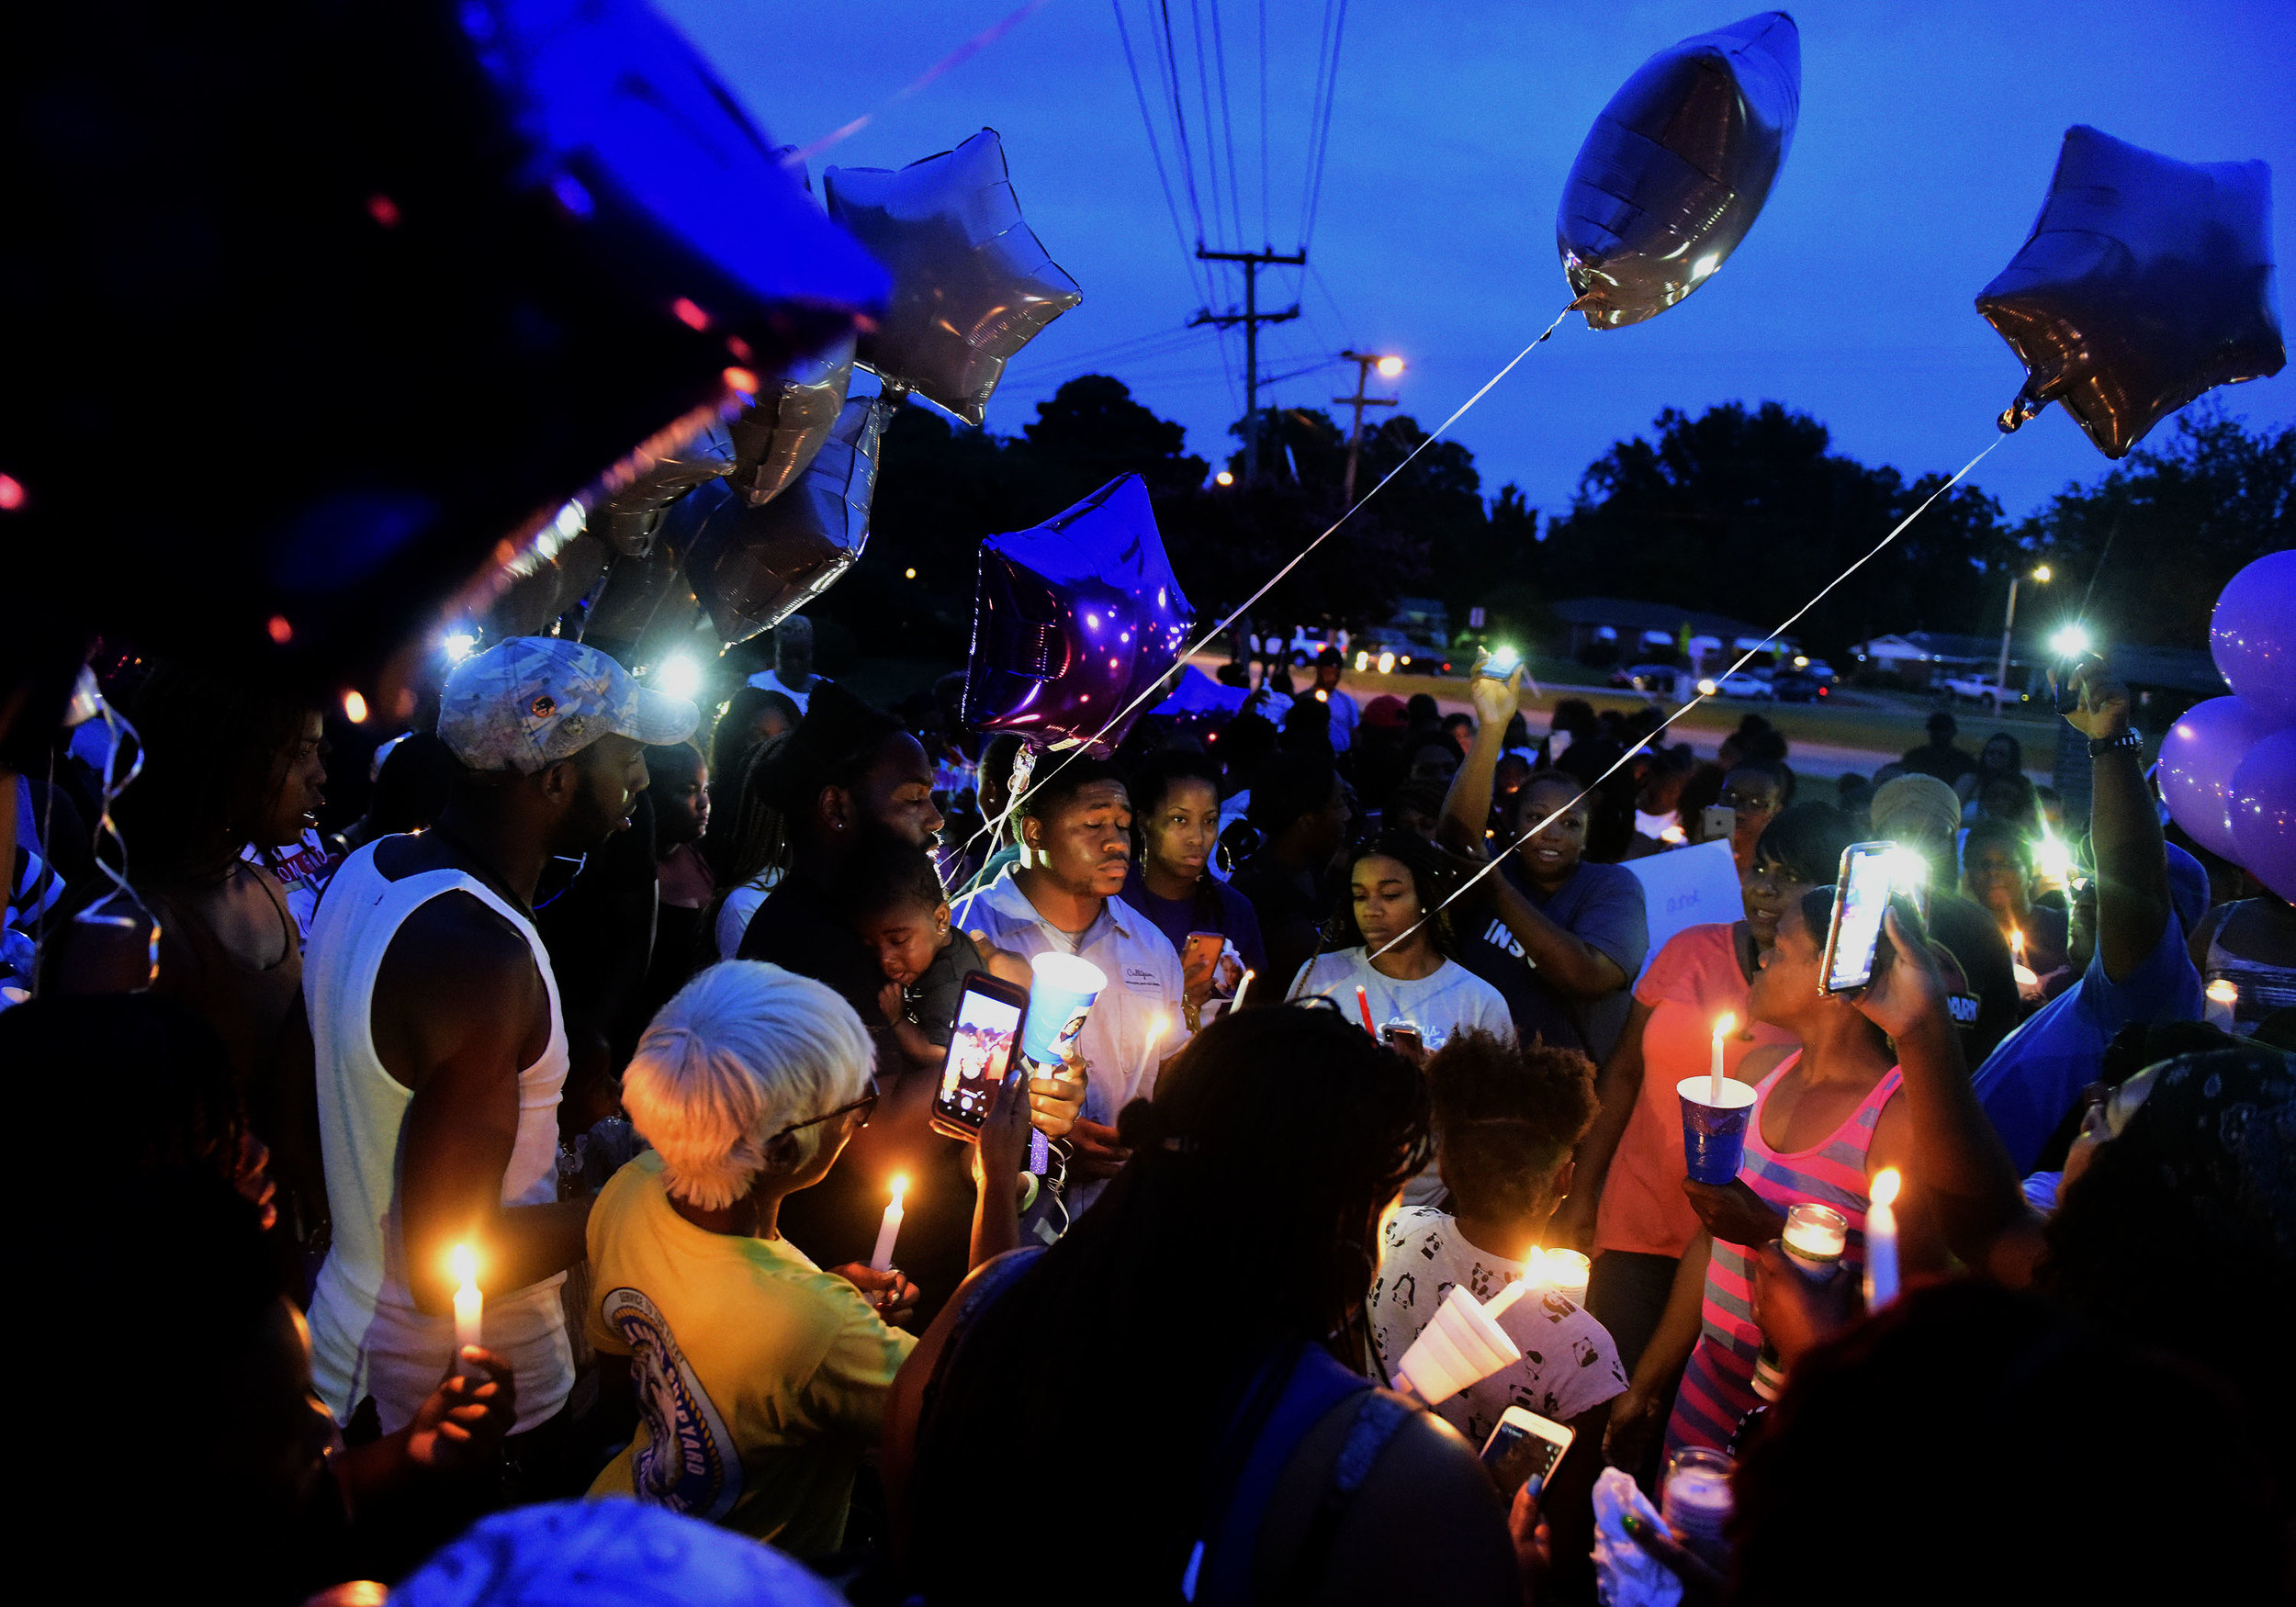  Family members, friends and members of the community gather to light candles and release balloons to celebrate the life of 17-year-old, Nye’Tazia Hicks, in Portsmouth, Virginia on Thursday, August 1, 2019. 